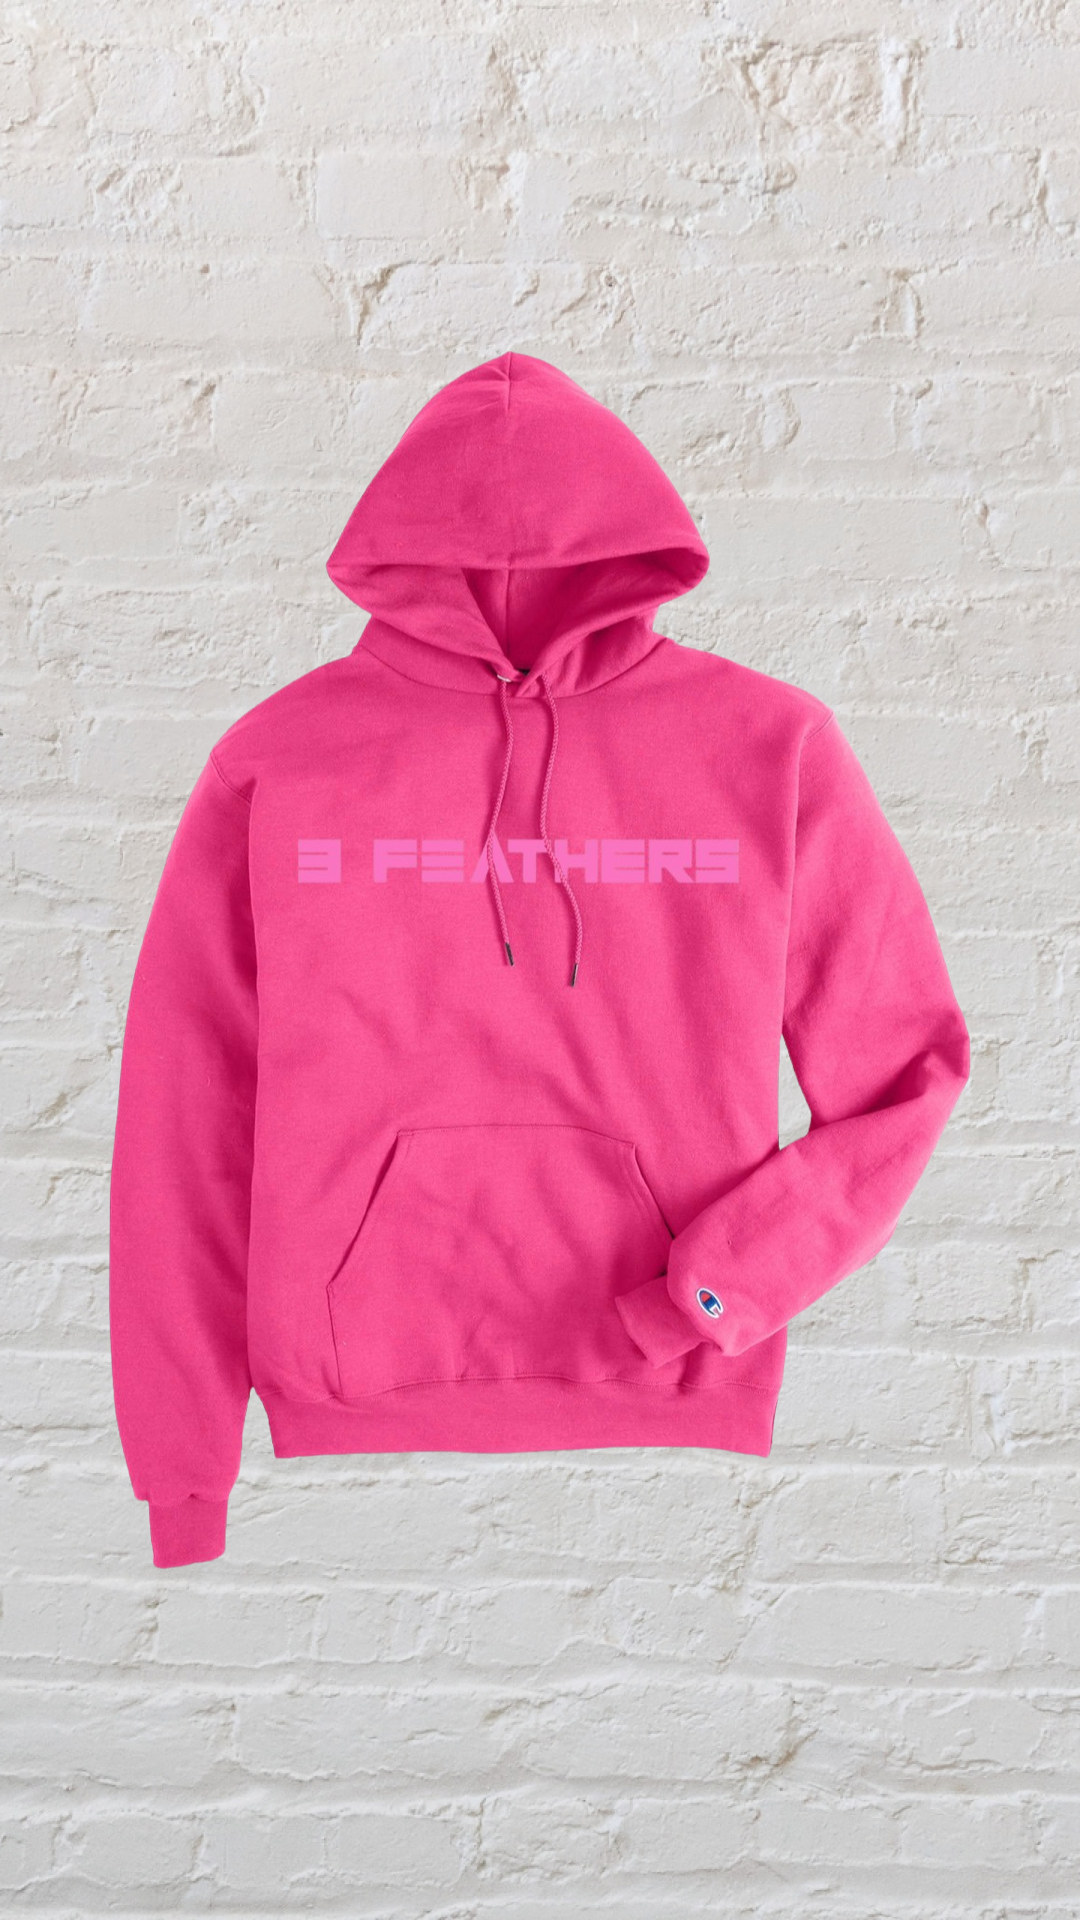 Be My Snag "3 Feathers" Hoodie